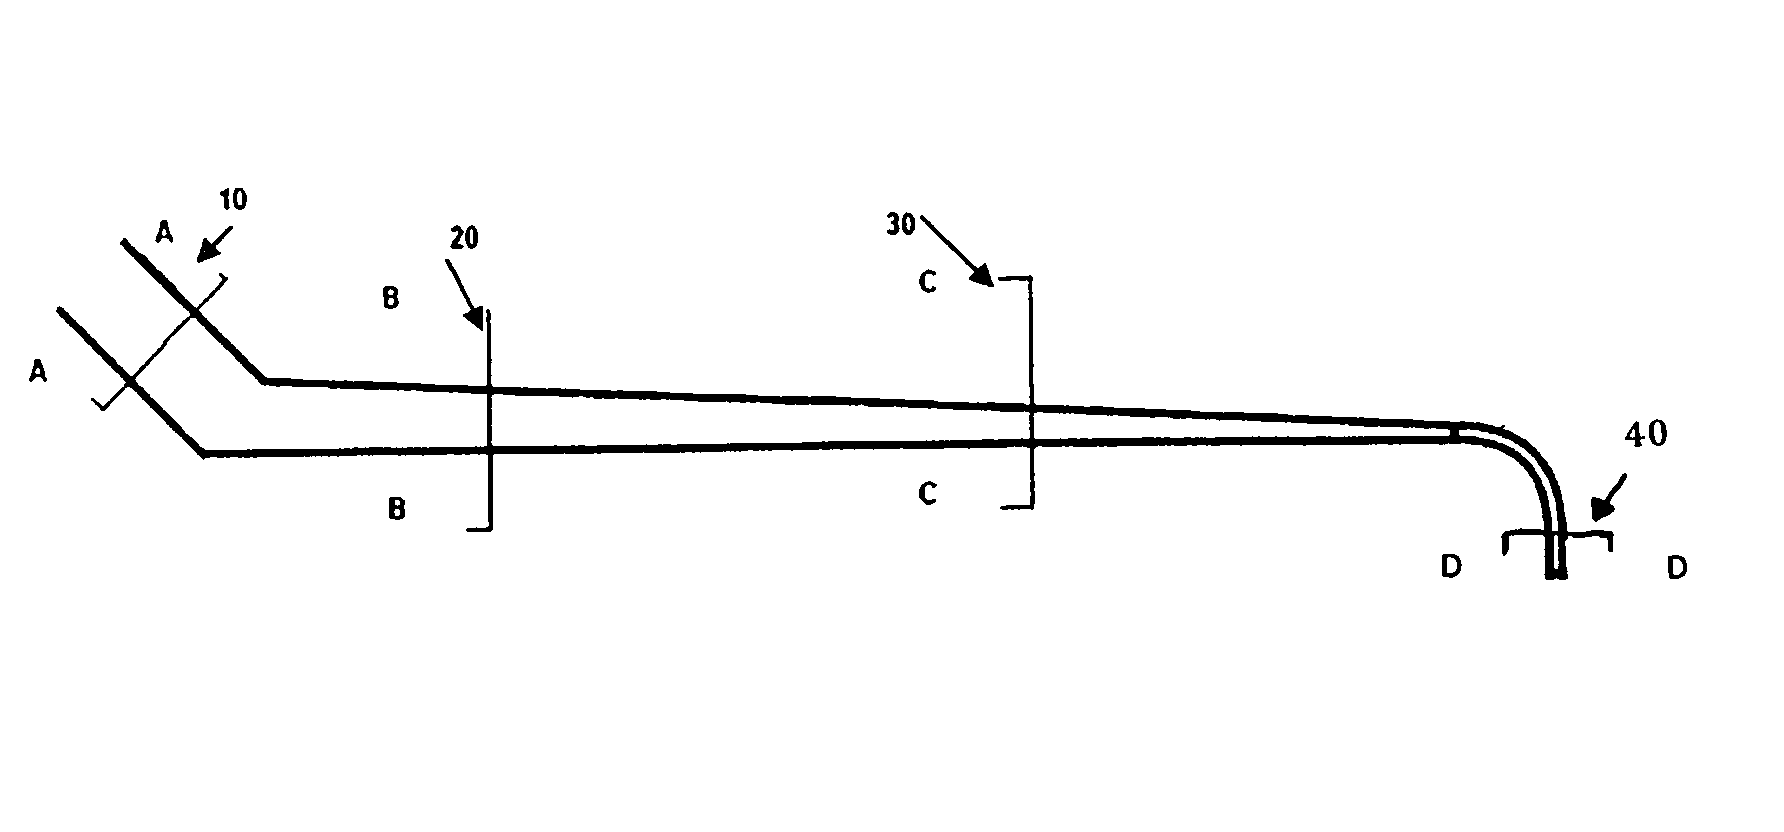 Apparatus for the uniform distribution of fibers in an air stream